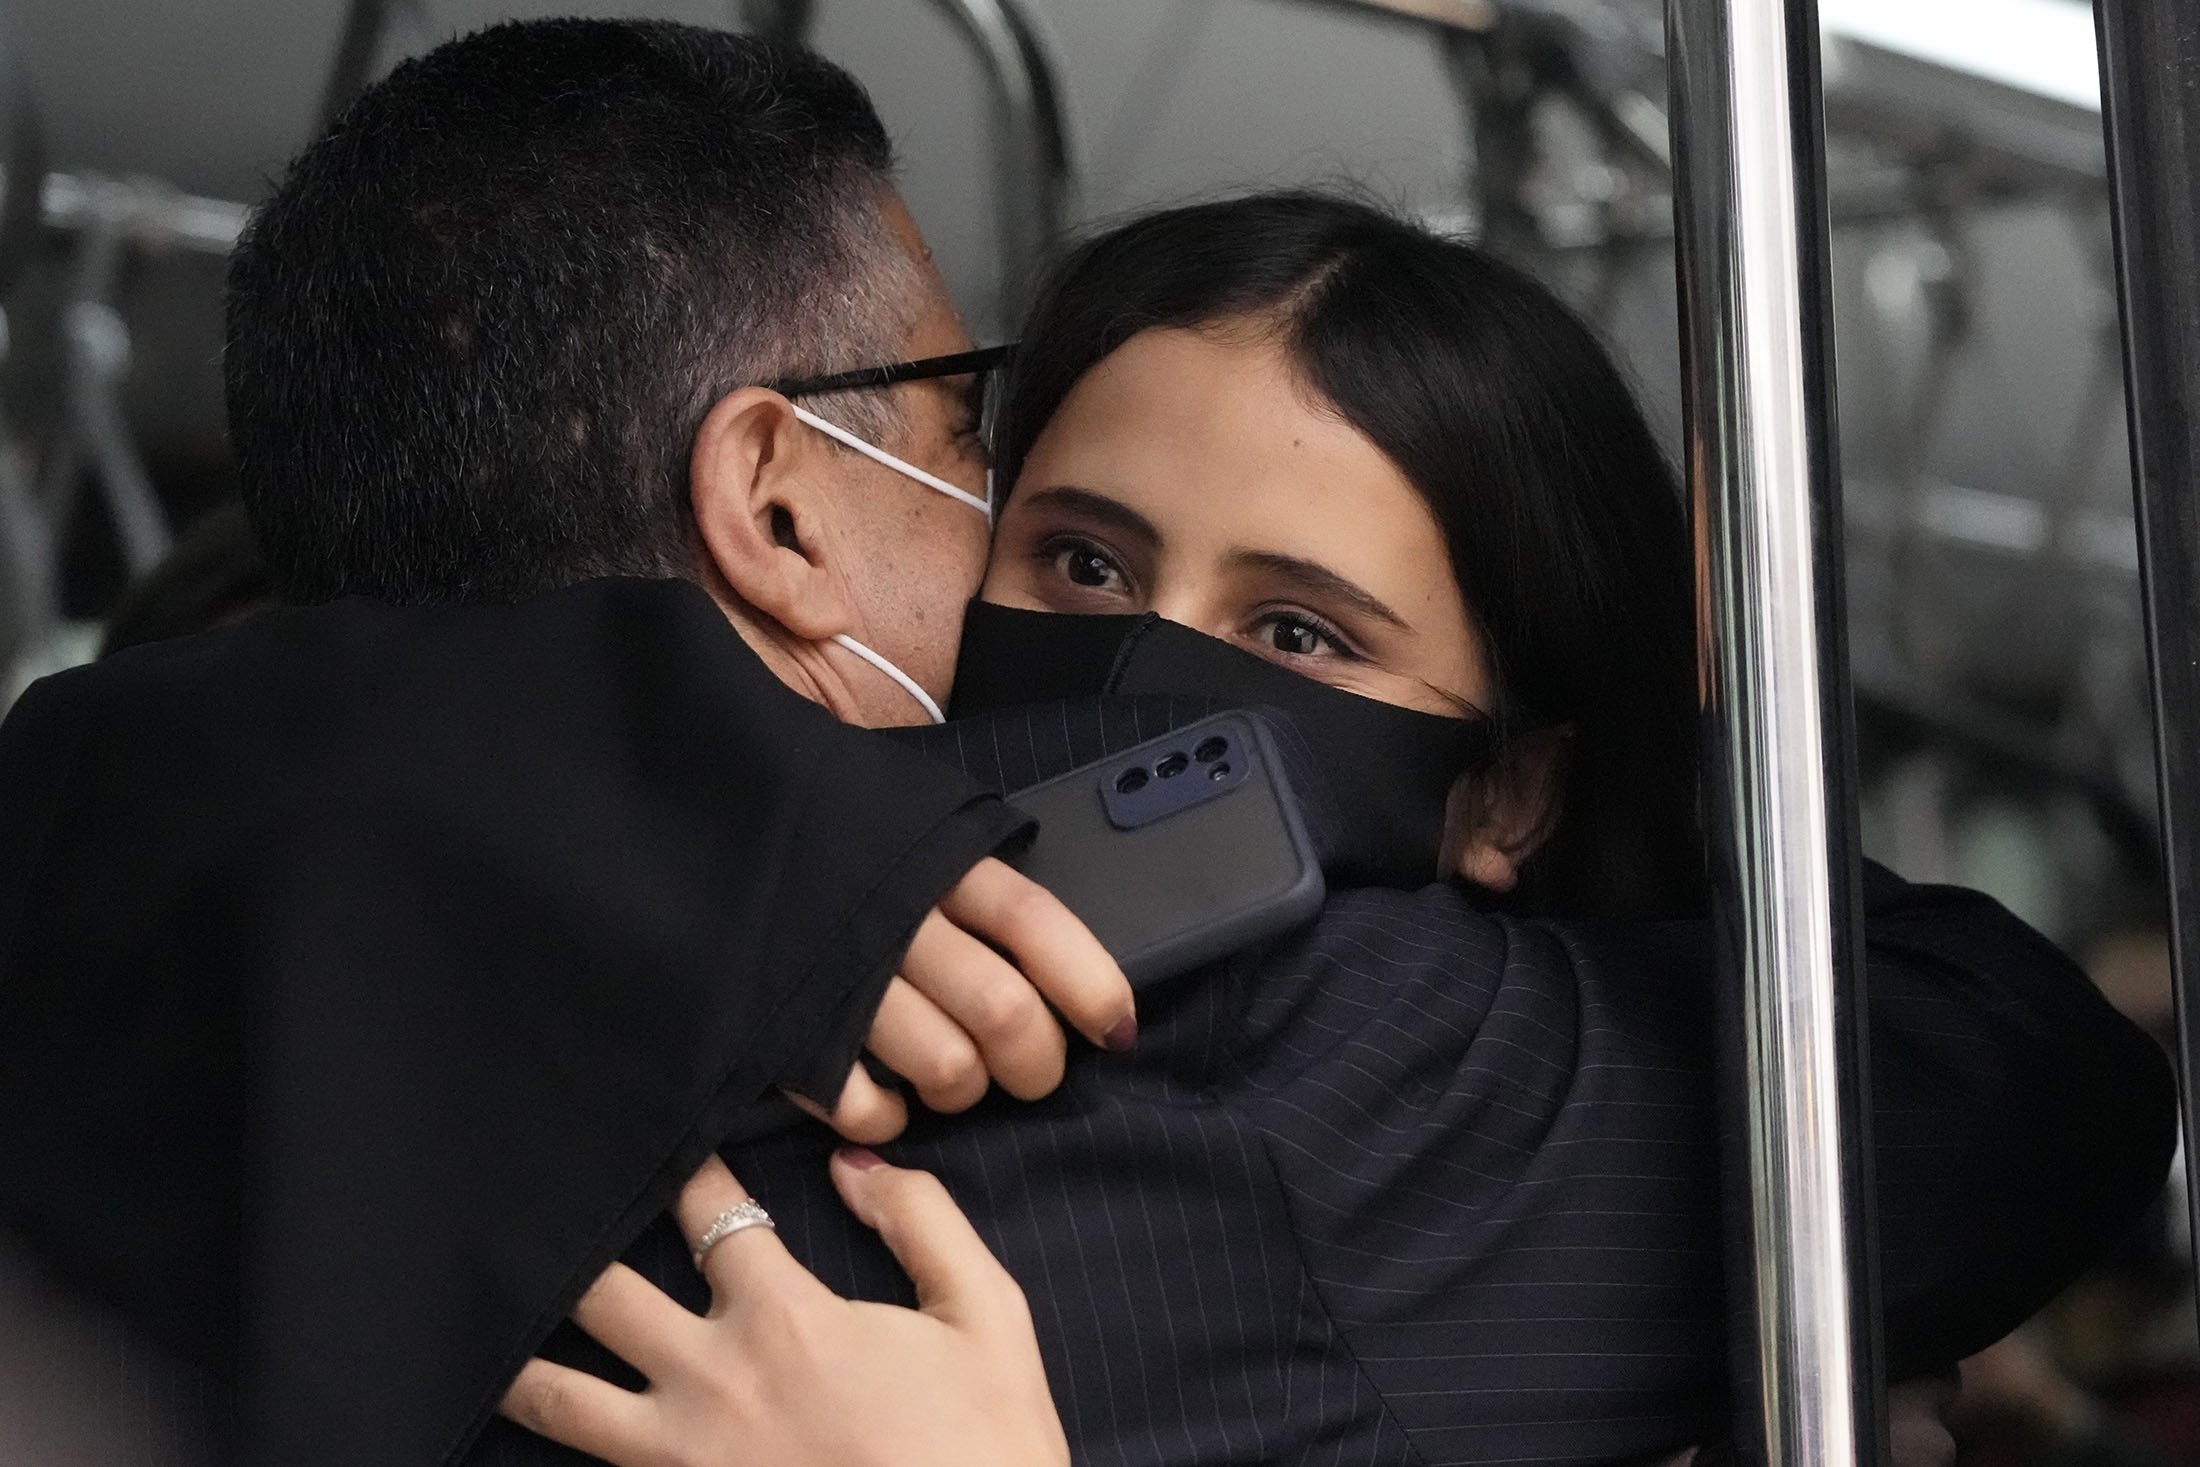 Afghan musician Marzia Anwari (R), hugs Ahmad Naser Sarmast, founder and director of the Afghanistan National Institute of Music, inside a bus after she disembarked from an airplane at a military airport, in Lisbon, Portugal, Dec. 13, 2021. (AP Photo)